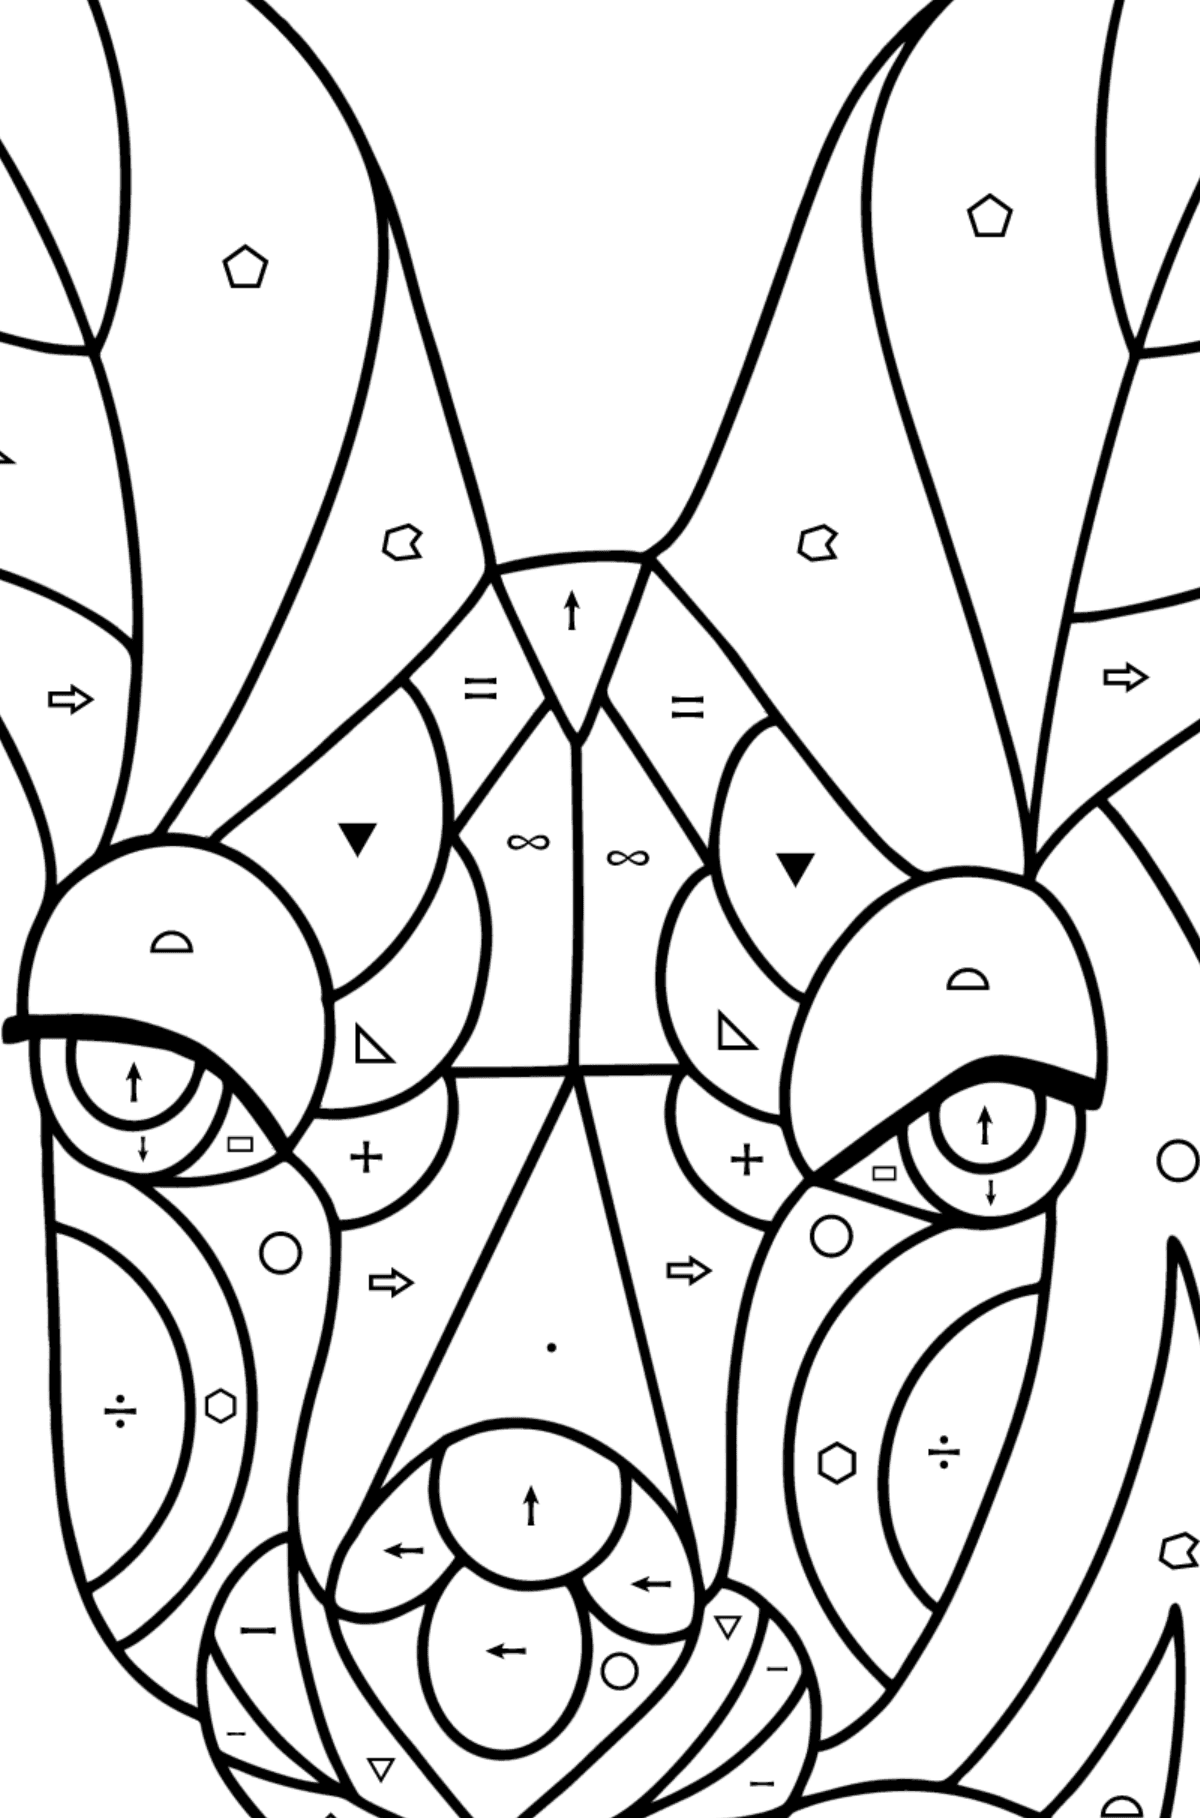 Antistress Kangaroo coloring page - Coloring by Symbols and Geometric Shapes for Kids